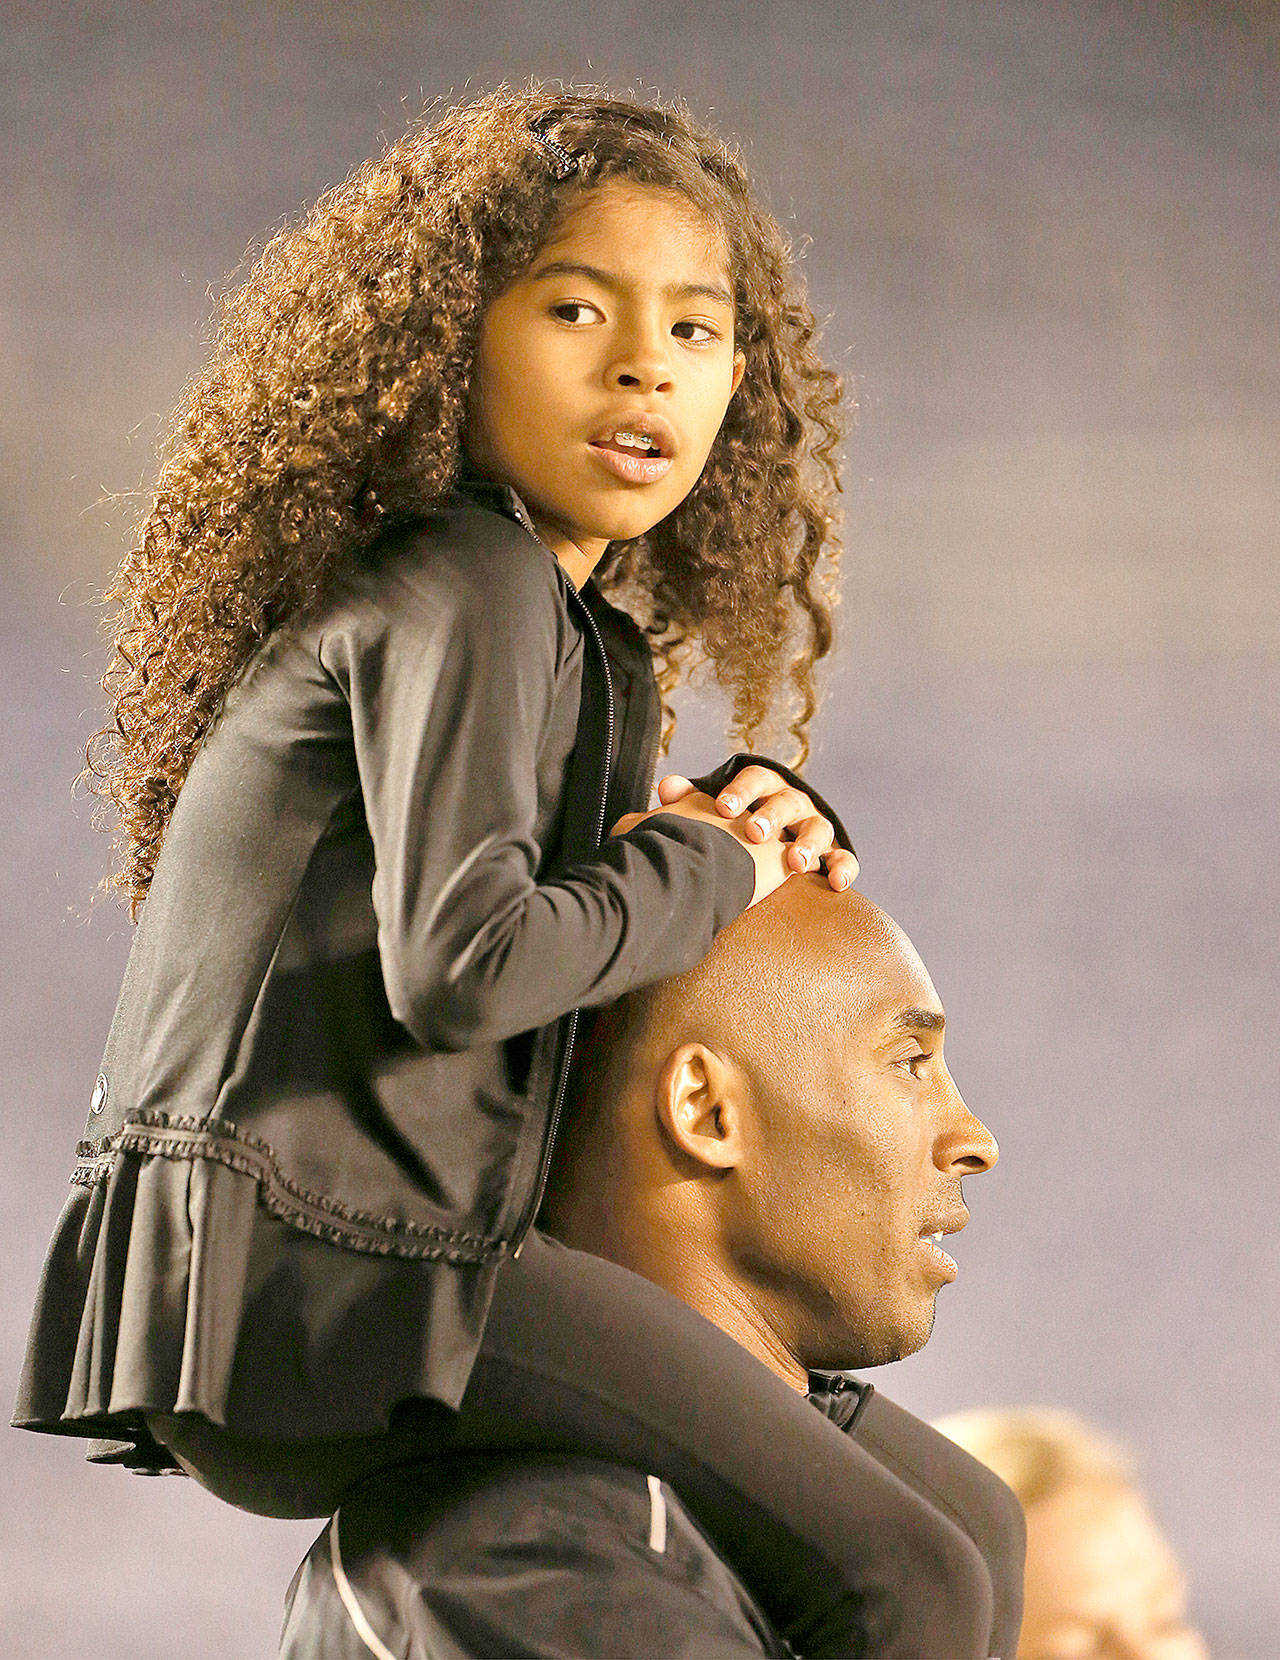 Gianna Bryant, 13, was going to carry on father Kobe's basketball